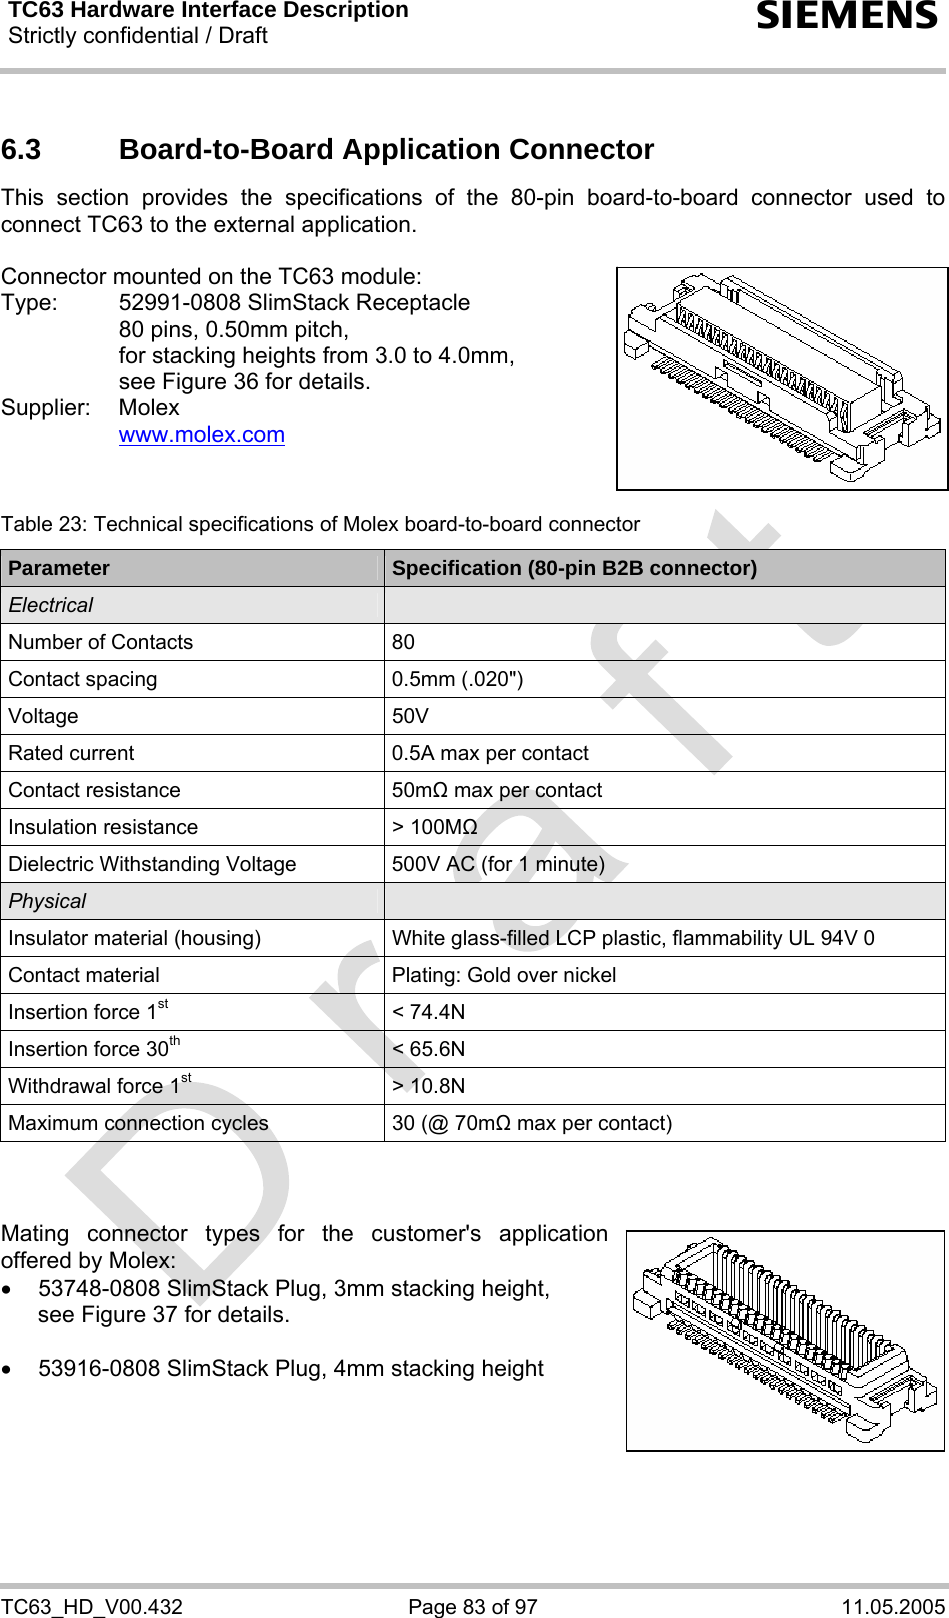 TC63 Hardware Interface Description Strictly confidential / Draft  s TC63_HD_V00.432  Page 83 of 97  11.05.2005 6.3  Board-to-Board Application Connector This section provides the specifications of the 80-pin board-to-board connector used to connect TC63 to the external application.   Connector mounted on the TC63 module: Type:  52991-0808 SlimStack Receptacle    80 pins, 0.50mm pitch,   for stacking heights from 3.0 to 4.0mm,   see Figure 36 for details. Supplier: Molex   www.molex.com    Table 23: Technical specifications of Molex board-to-board connector Parameter  Specification (80-pin B2B connector) Electrical   Number of Contacts  80 Contact spacing  0.5mm (.020&quot;) Voltage 50V Rated current  0.5A max per contact Contact resistance  50m max per contact Insulation resistance  &gt; 100M Dielectric Withstanding Voltage  500V AC (for 1 minute) Physical   Insulator material (housing)  White glass-filled LCP plastic, flammability UL 94V 0 Contact material  Plating: Gold over nickel Insertion force 1st &lt; 74.4N Insertion force 30th &lt; 65.6N Withdrawal force 1st &gt; 10.8N Maximum connection cycles  30 (@ 70m max per contact)    Mating connector types for the customer&apos;s application offered by Molex:  •  53748-0808 SlimStack Plug, 3mm stacking height, see Figure 37 for details.  •  53916-0808 SlimStack Plug, 4mm stacking height     